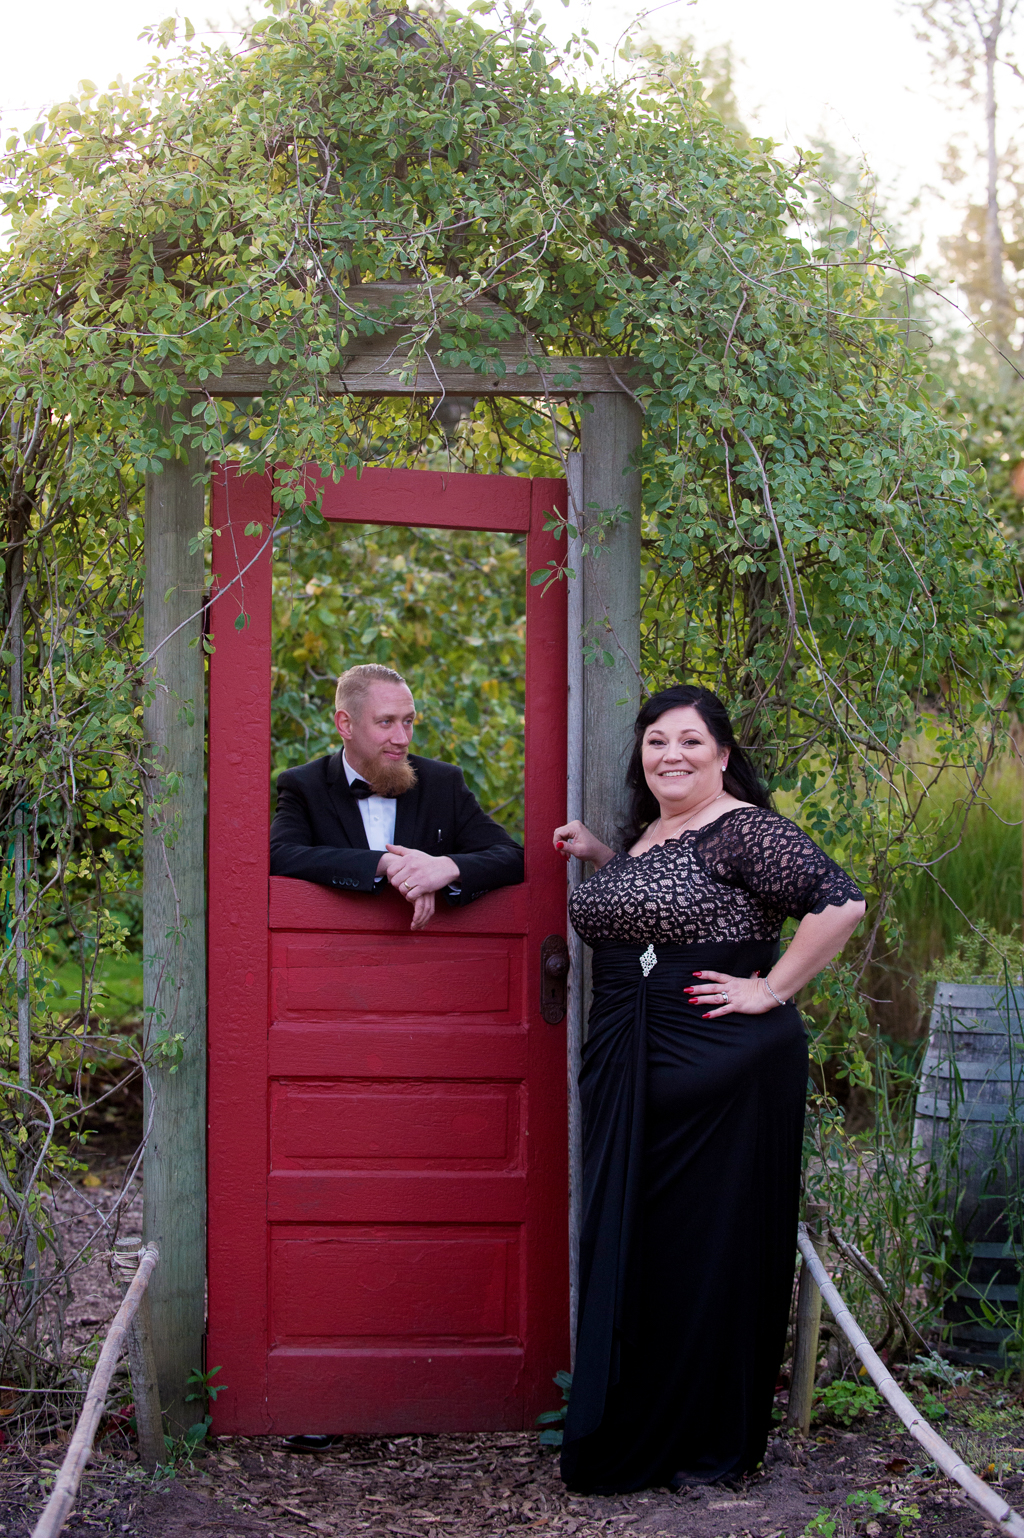 a bride wears a black wedding dress stands with her groom by a red door in a garden